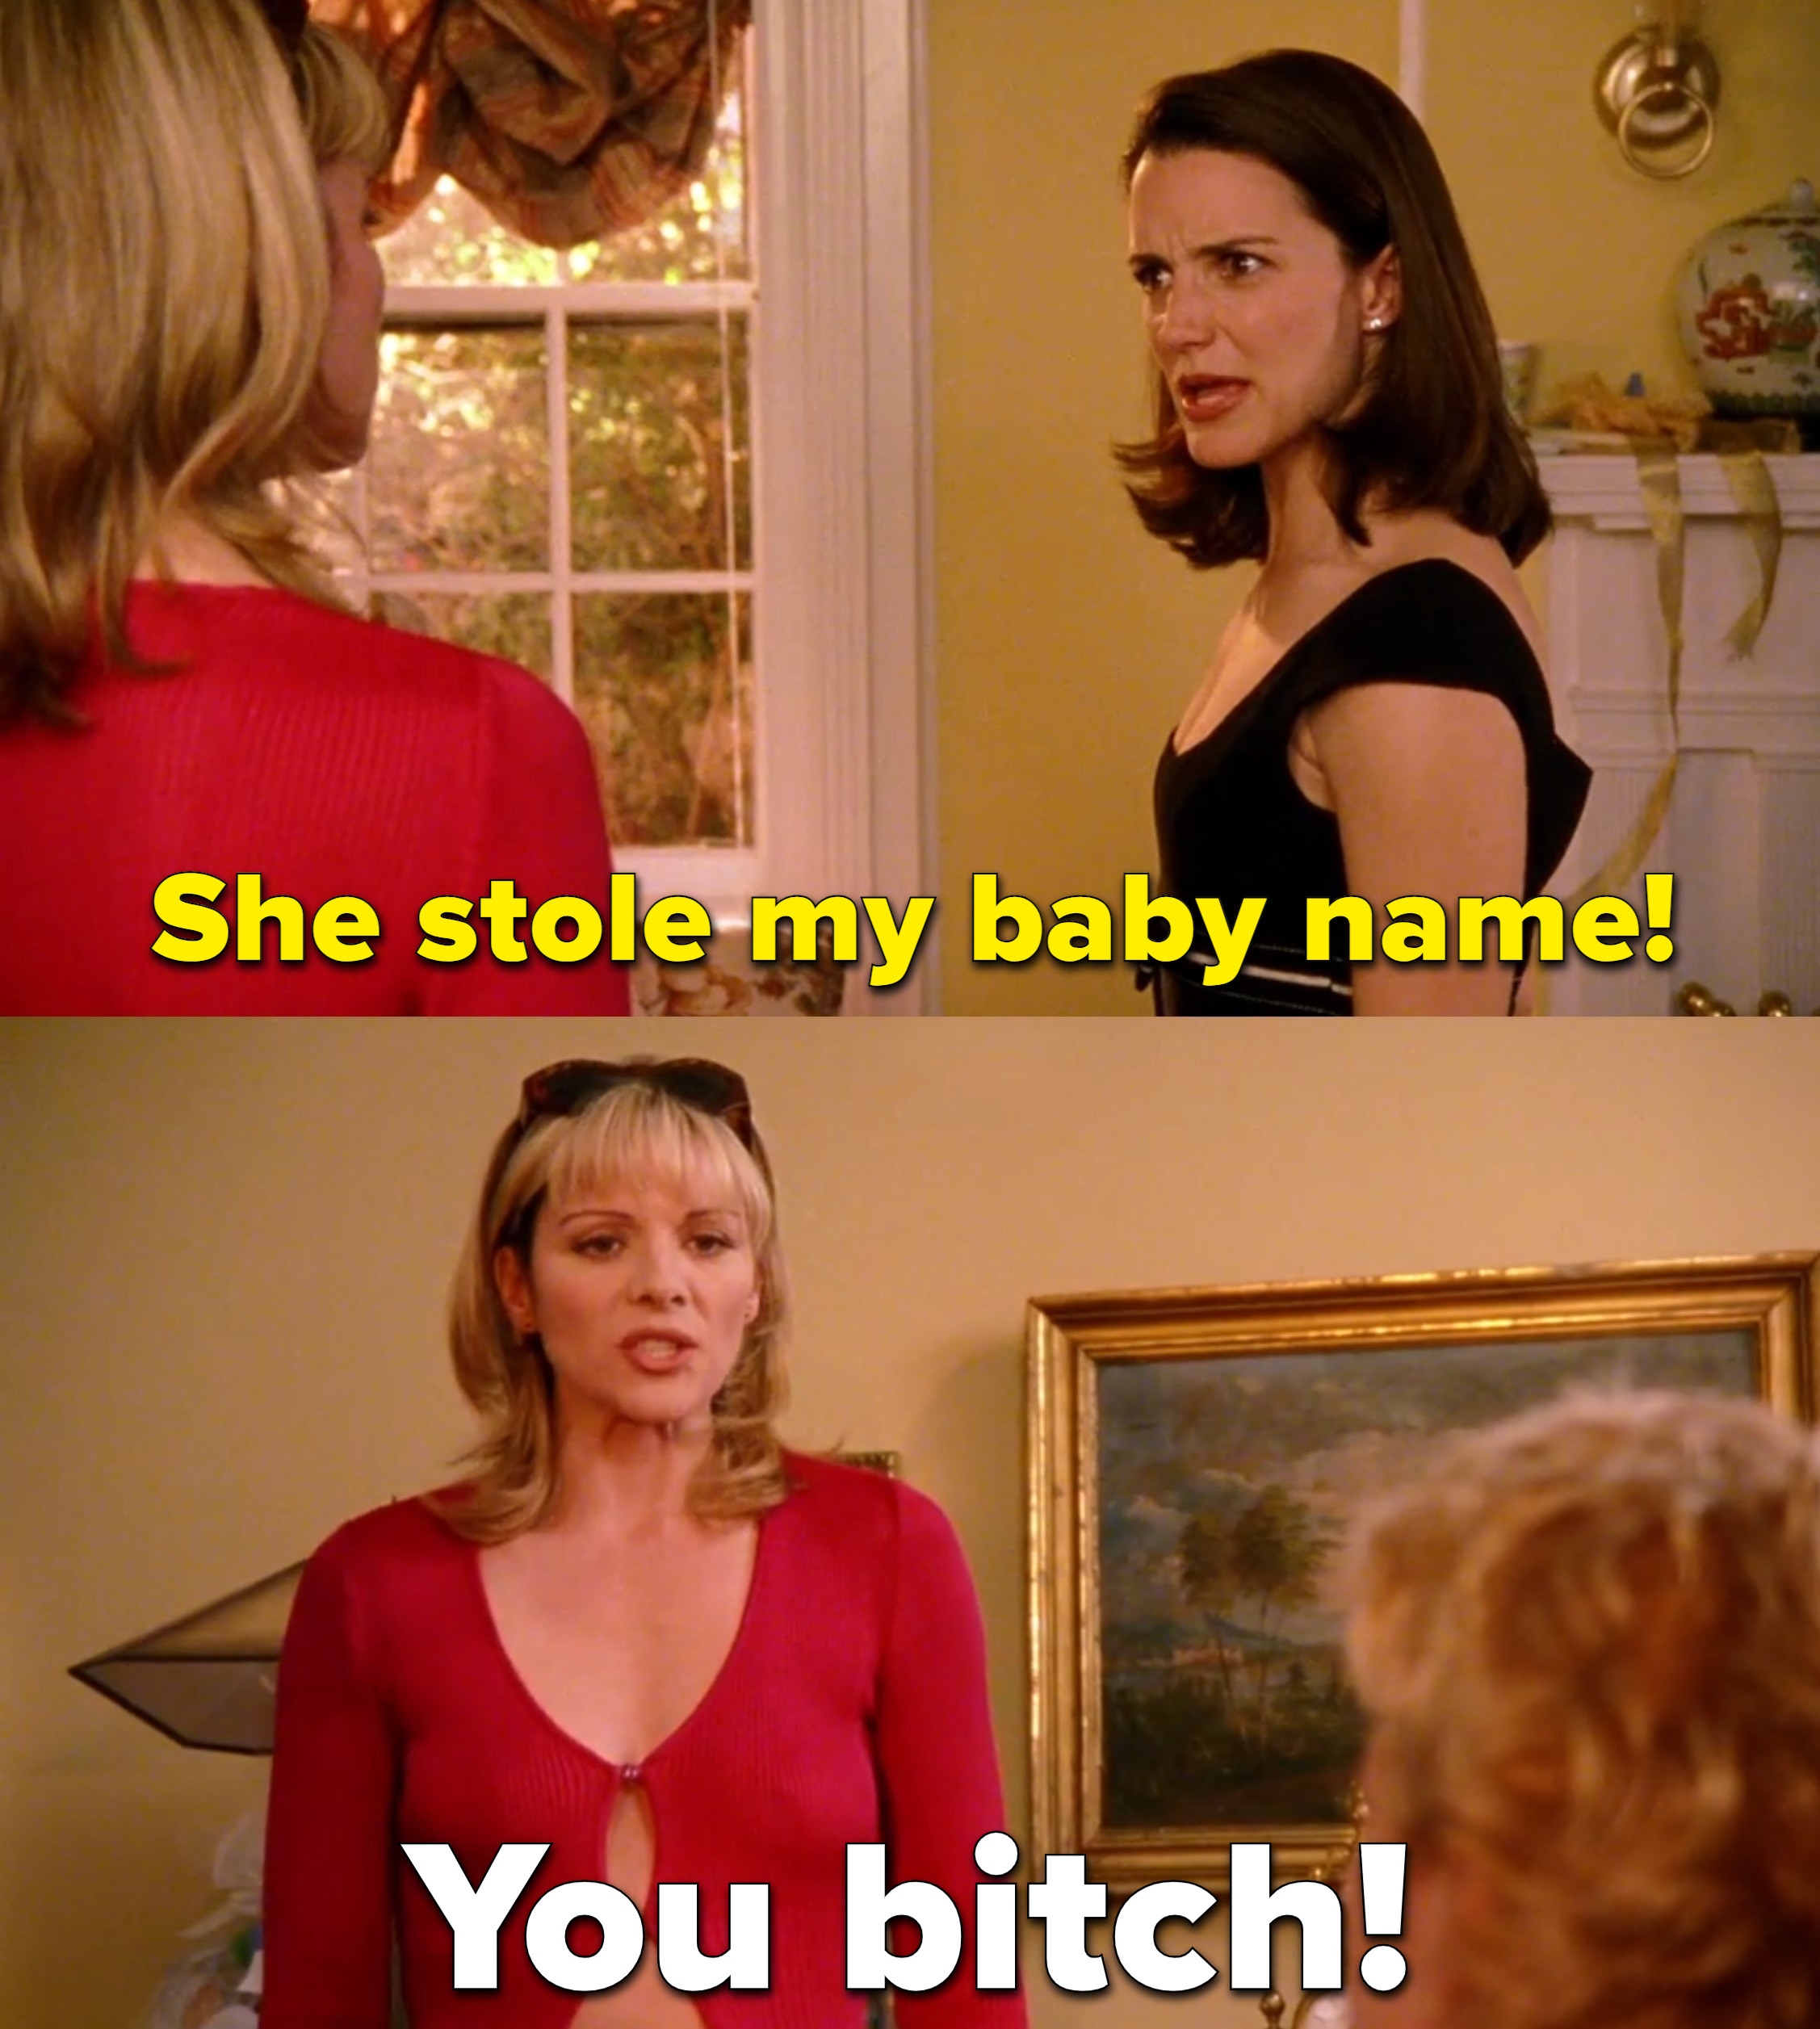 Scene from Sex and the City of Charlotte telling Samantha their friend Laney stole her baby name and Samantha saying &quot;You bitch!&quot;